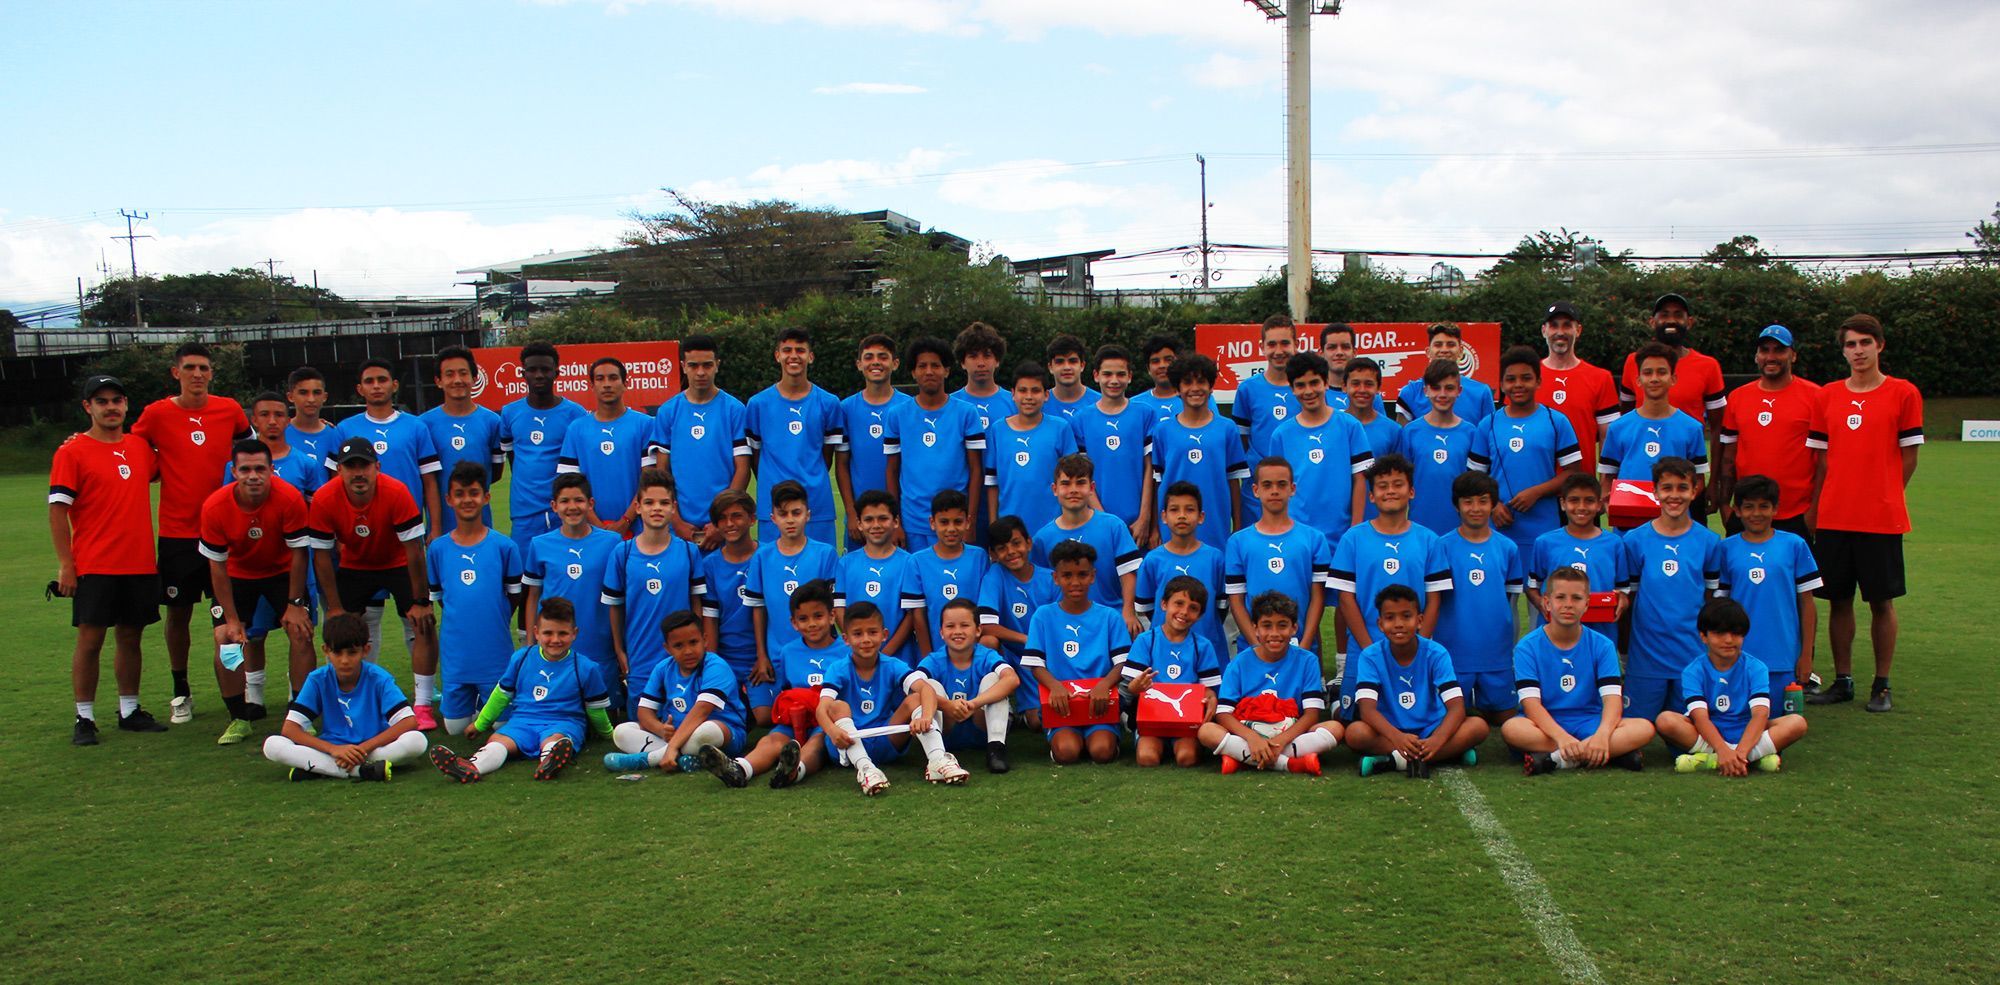 Second edition of B1 Camp Costa Rica